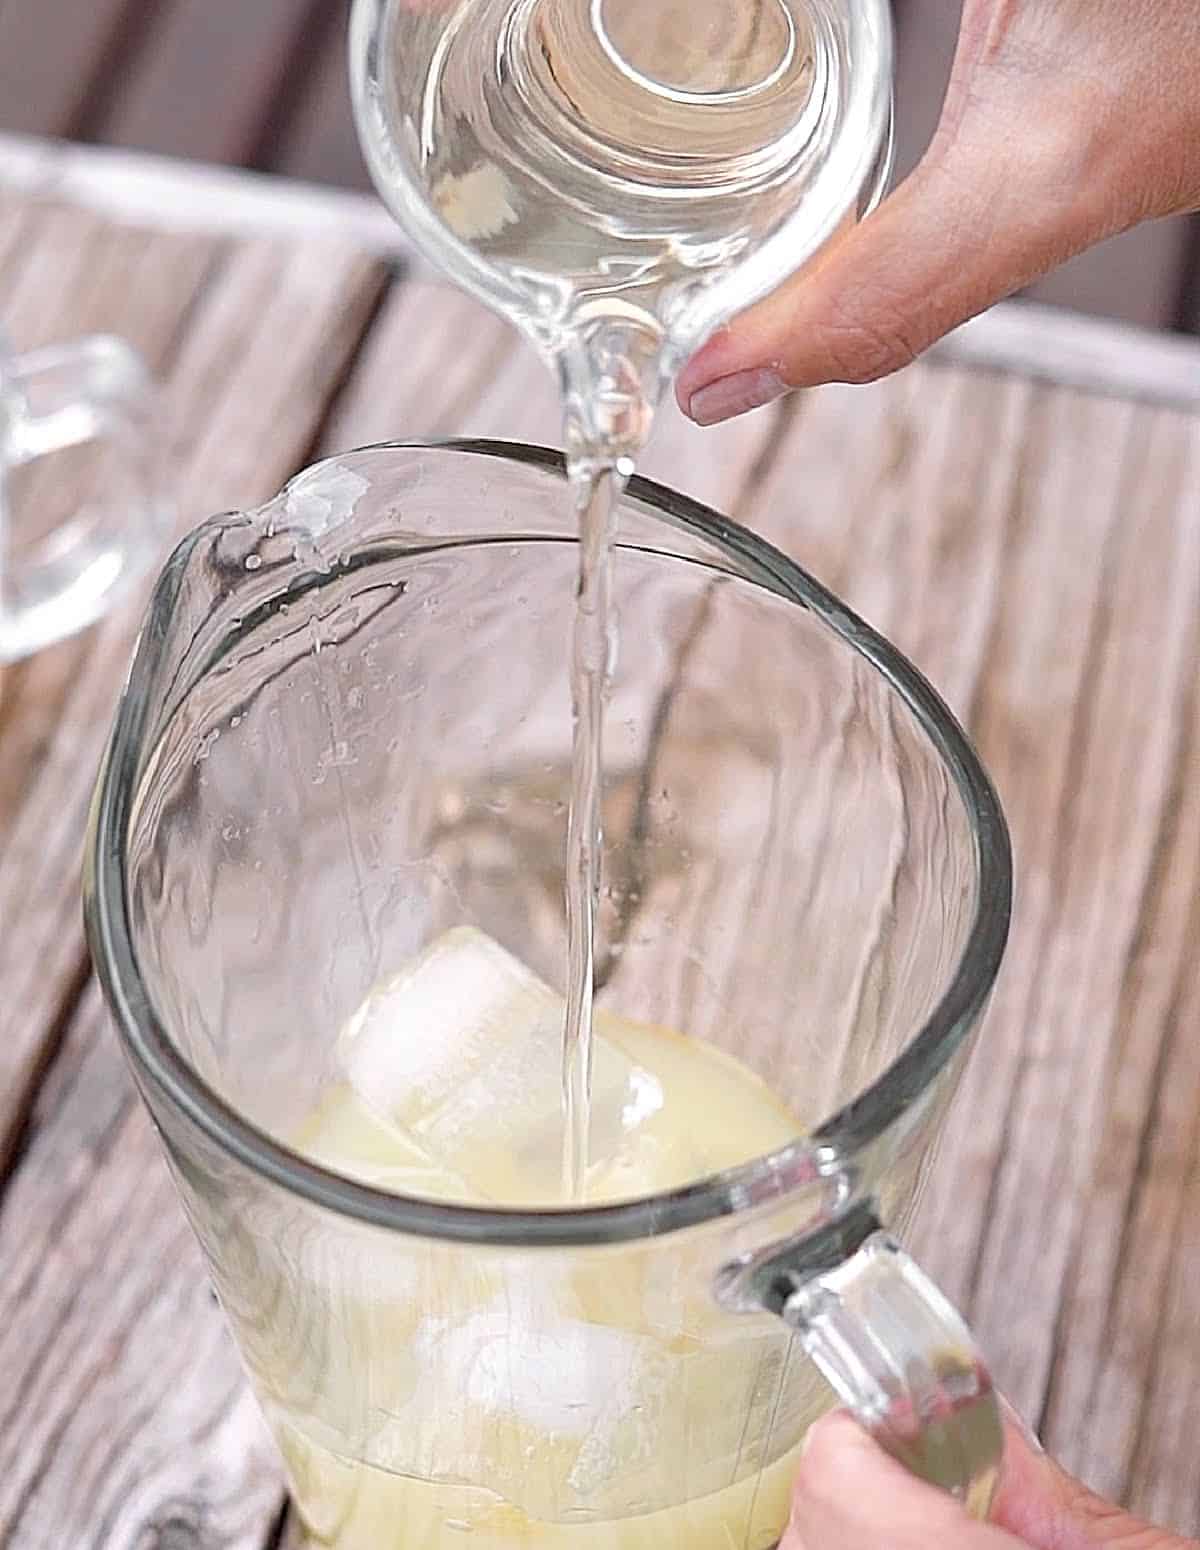 Syrup being added to a pitcher with lemon juice and ice cubes. Grey wooden surface.